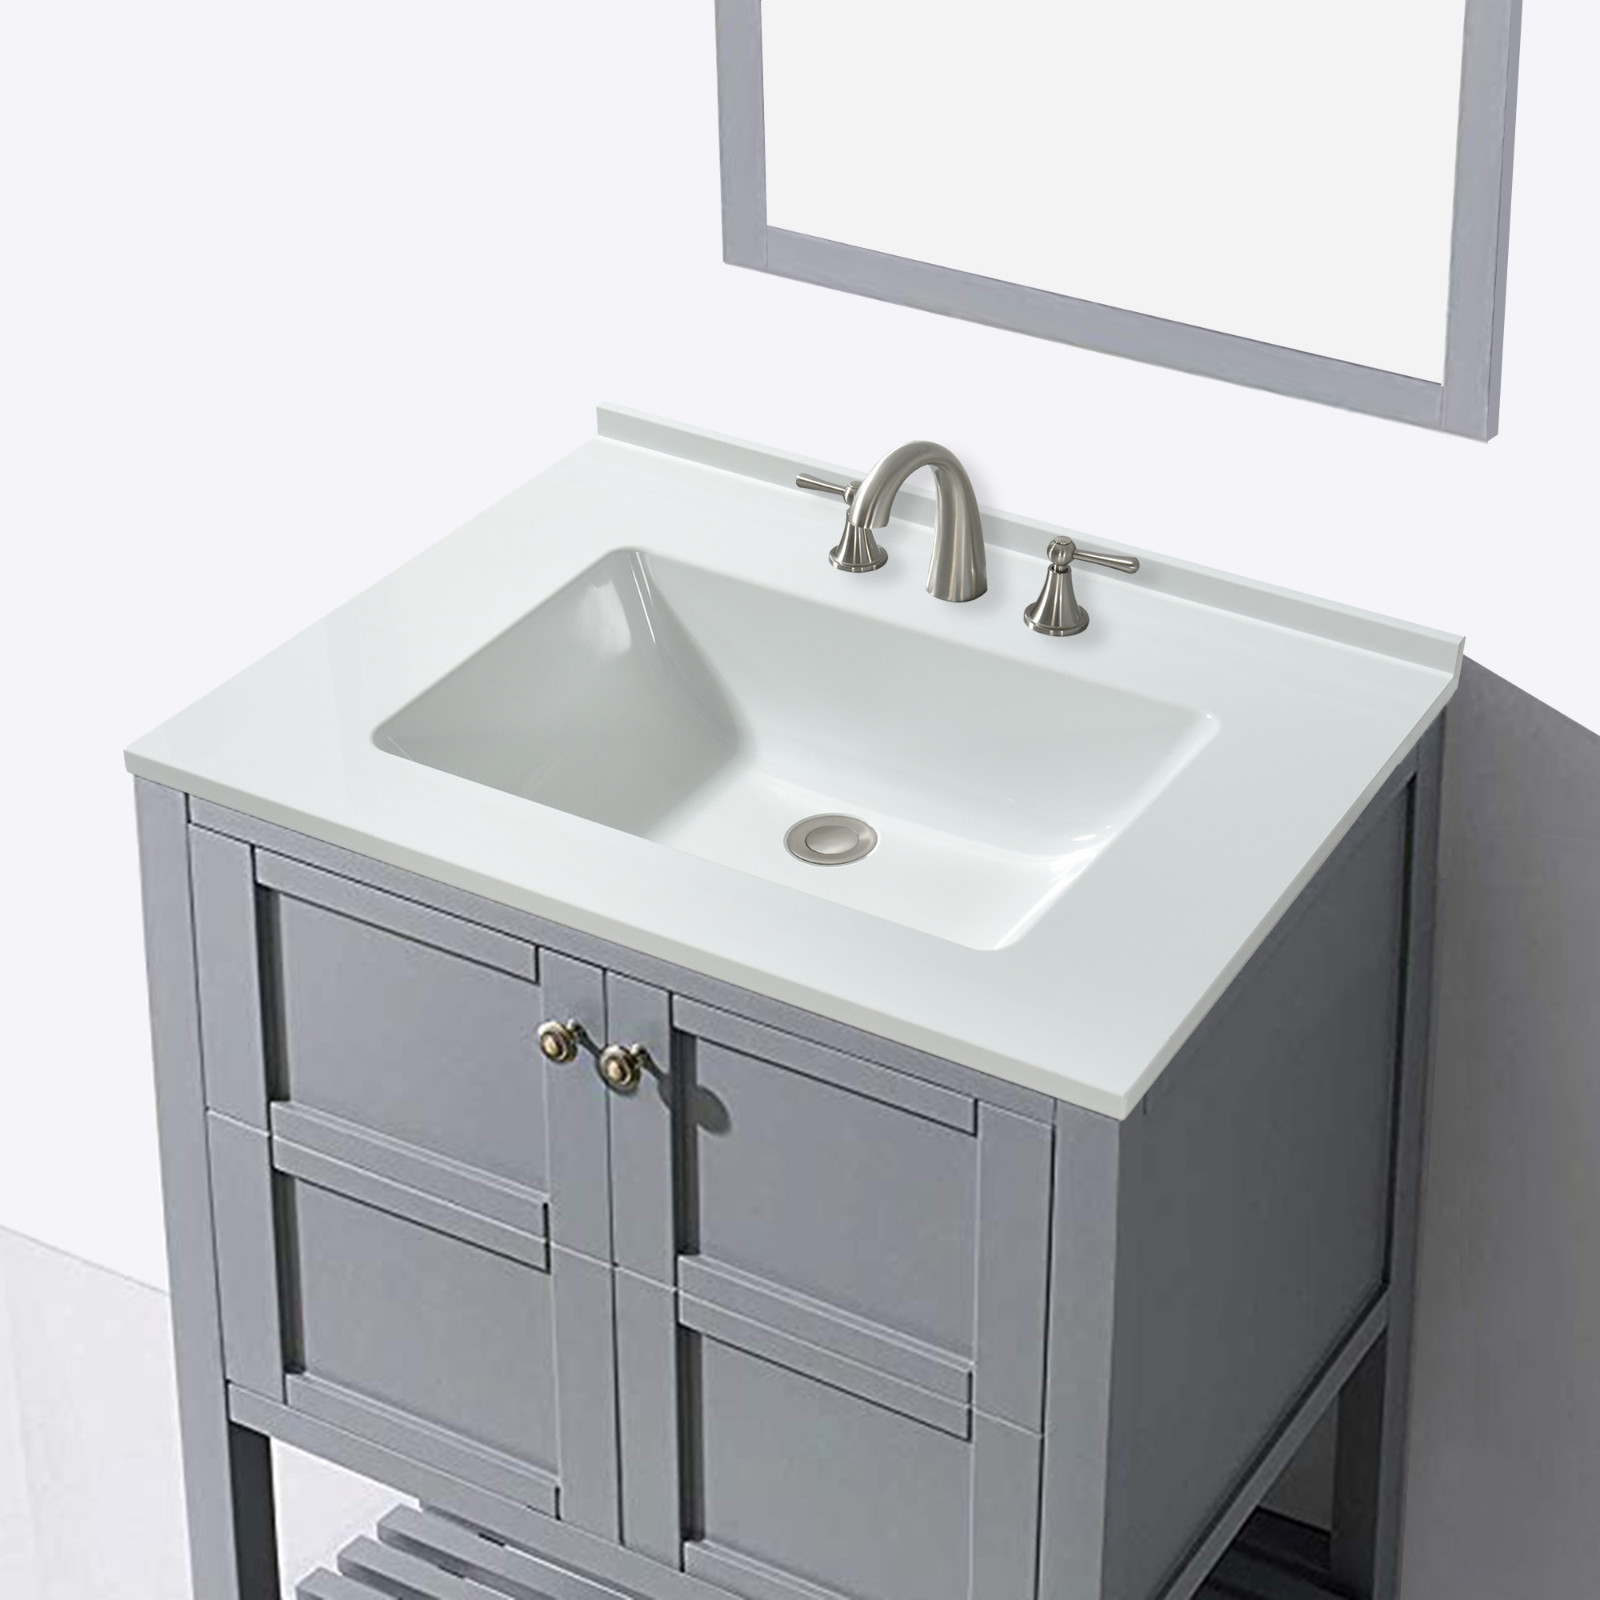  WOODBRIDGE VT2519-1000 Solid Surface Vanity Top with with Intergrated Sink and 3 Faucet Holes for 4-Inch Centerset Faucet, 25